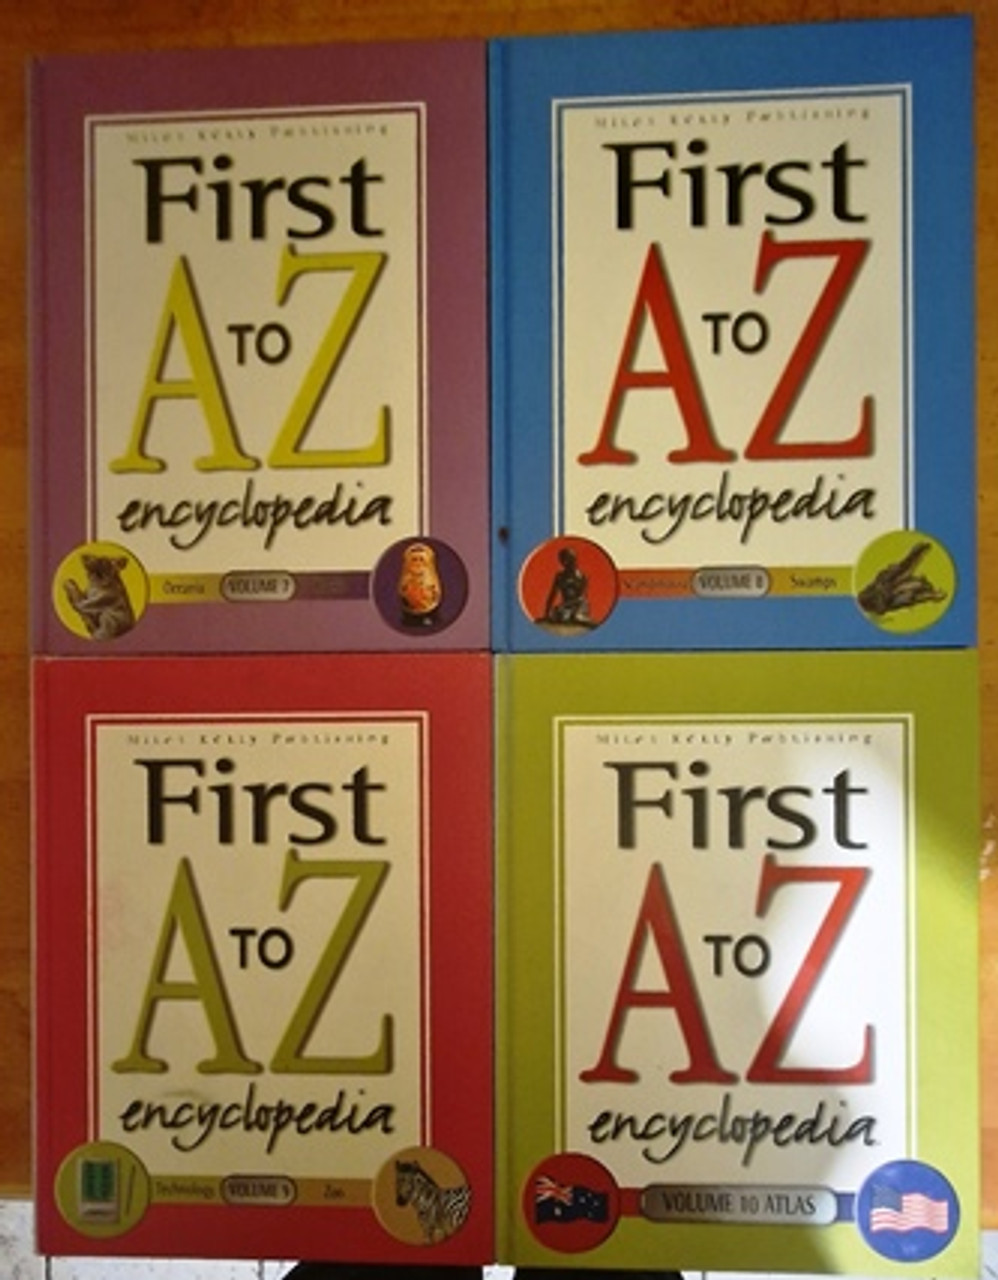 Miles Kelly Publishing / First A to Z Encyclopedia (Complete 10 Book Encyclopedia Set)